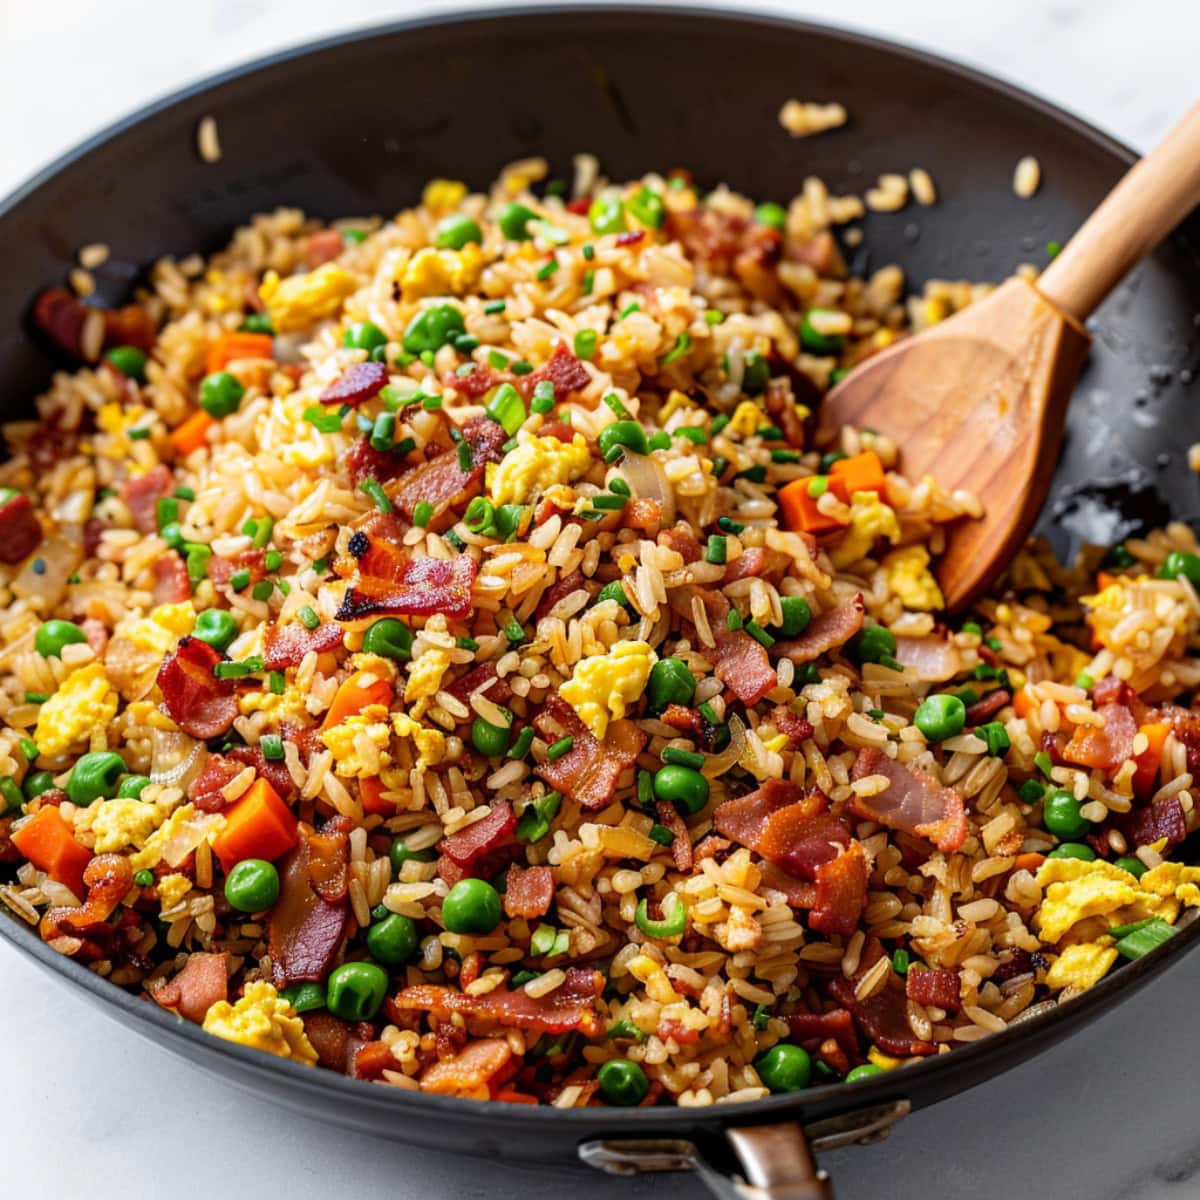 Bacon fried rice tossed in a skillet pan with a wooden ladle.